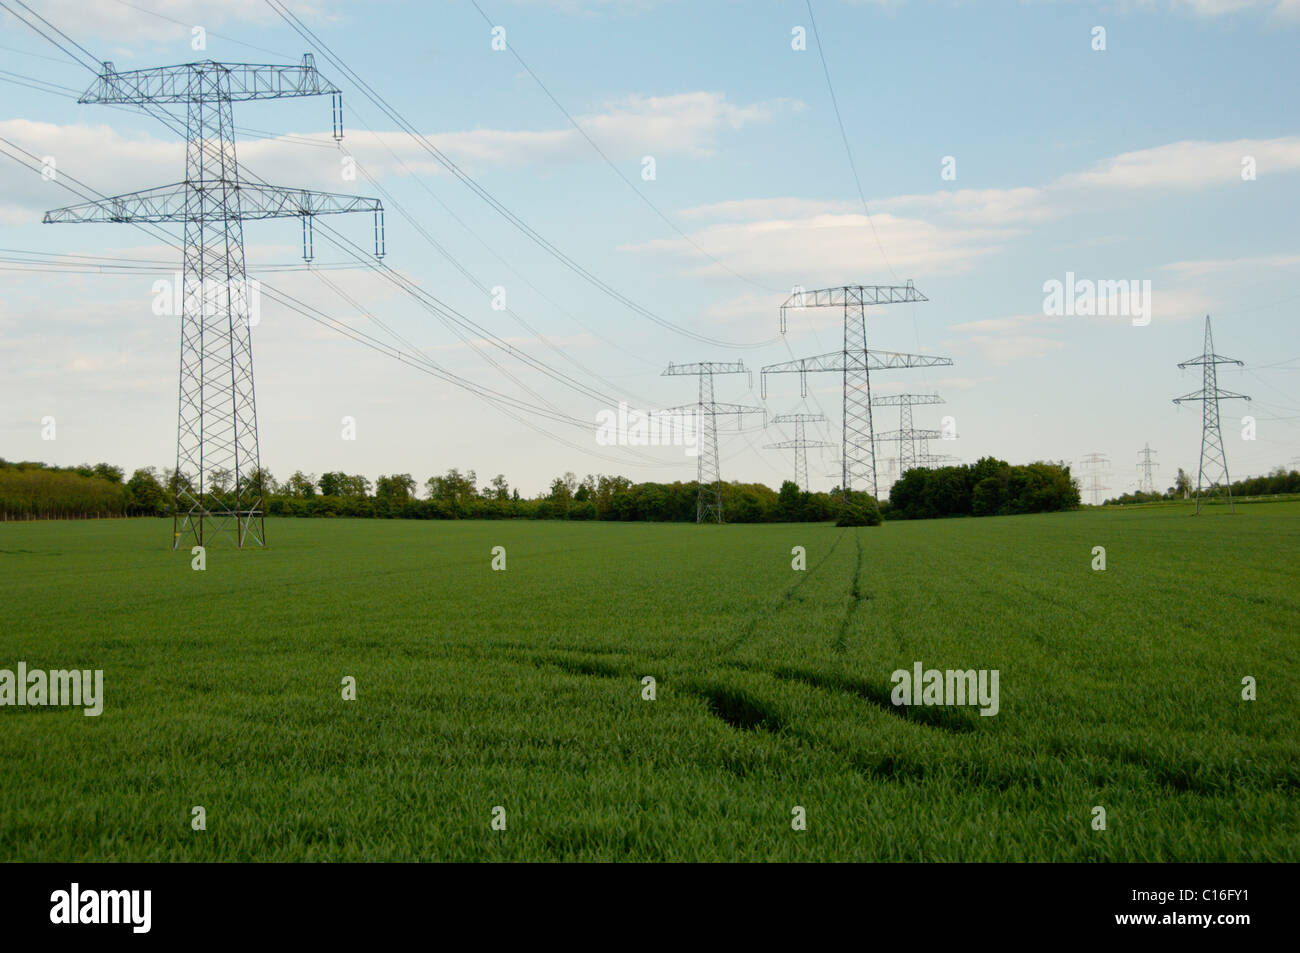 Electricity pylons standing in green fields, Burgenland, Austria, Europe Stock Photo